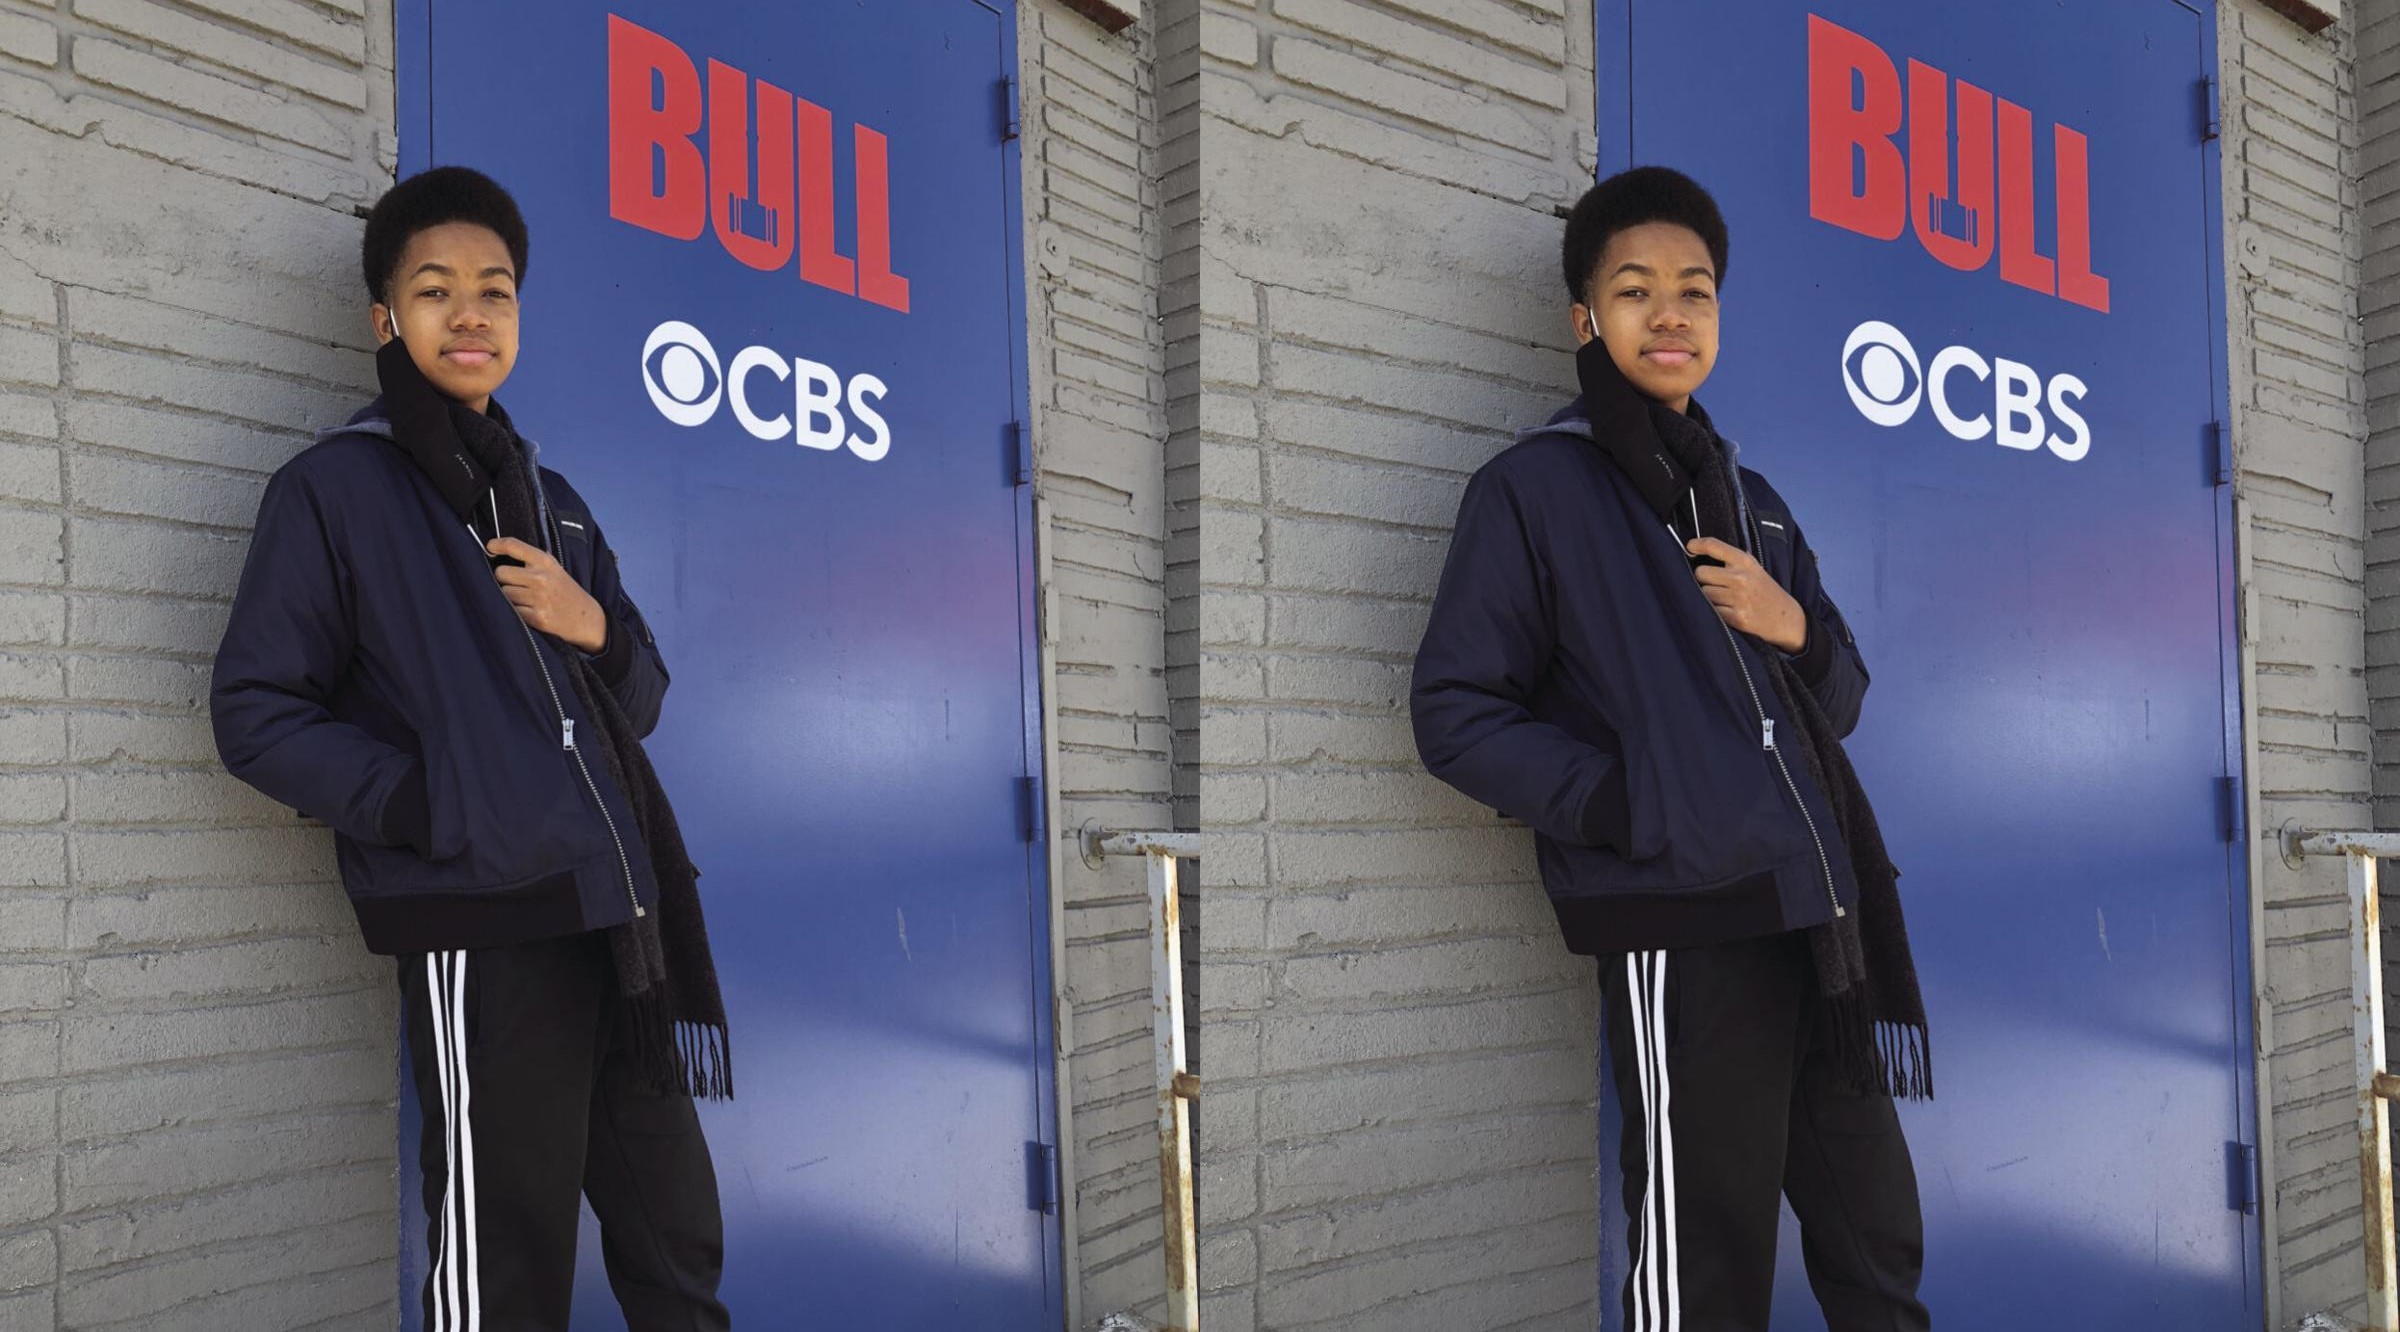 St. Thomas High School Student To Guest Star On National TV Series 'Bull' Tonight